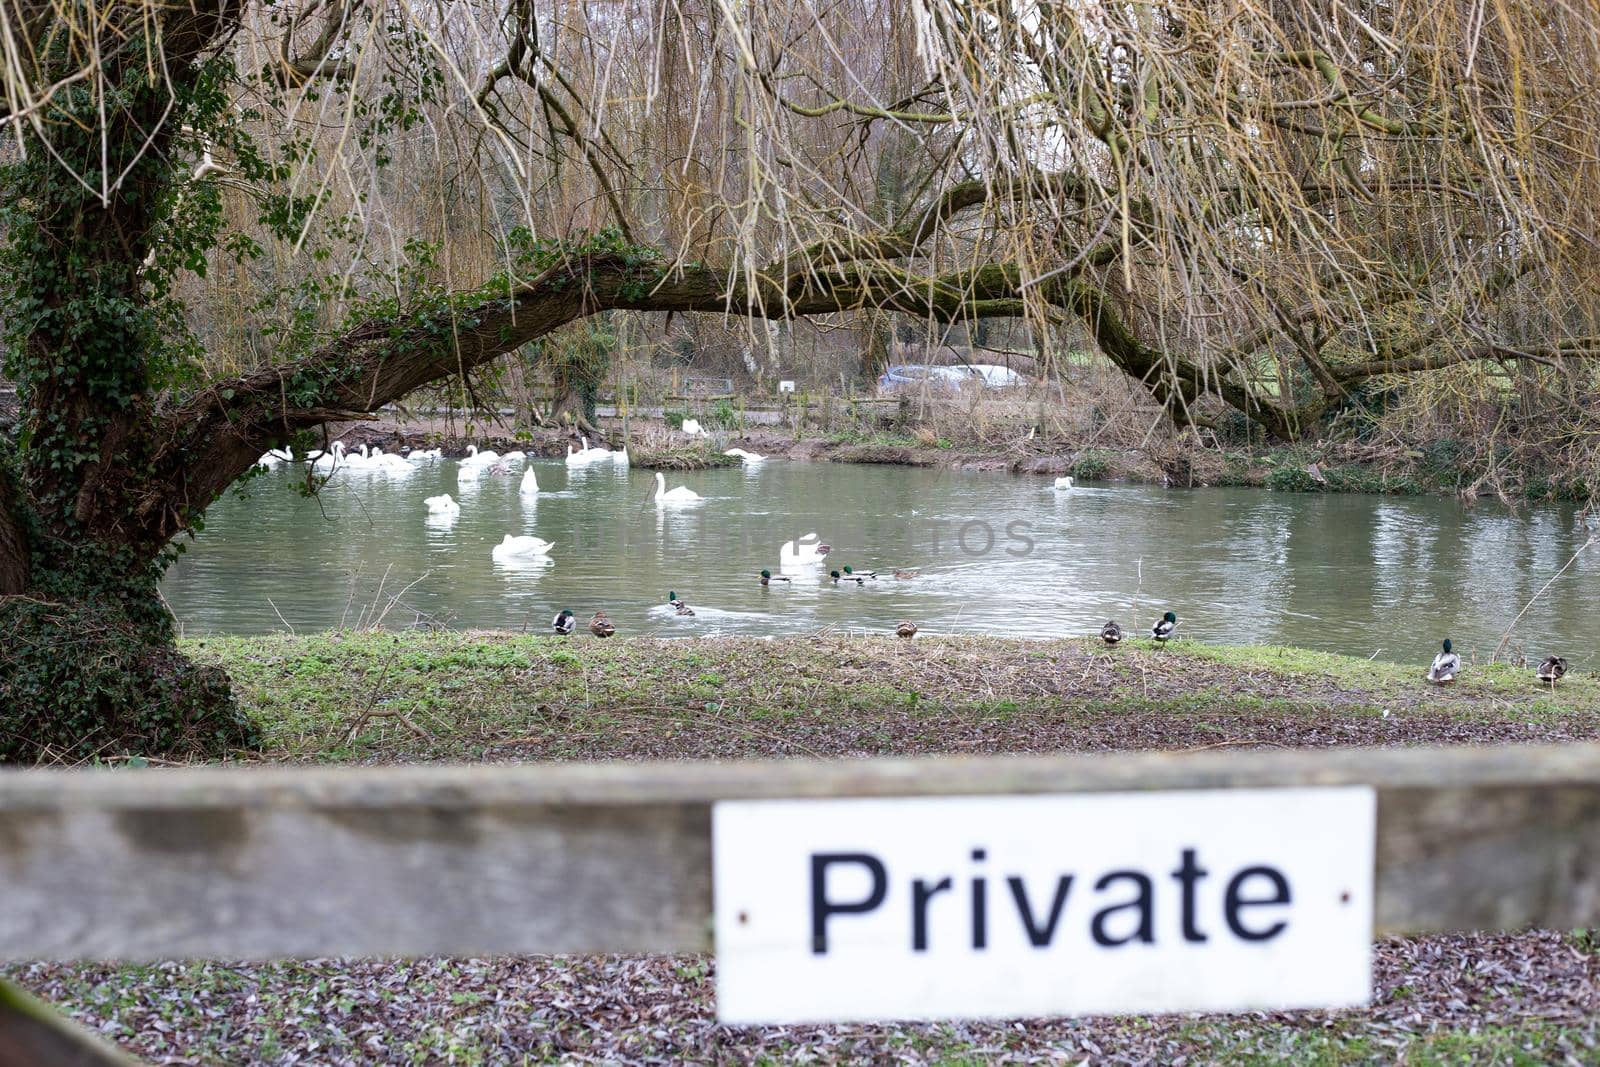 Private sign on farm wooden gate leading to spring swan lake. UK Suffolk